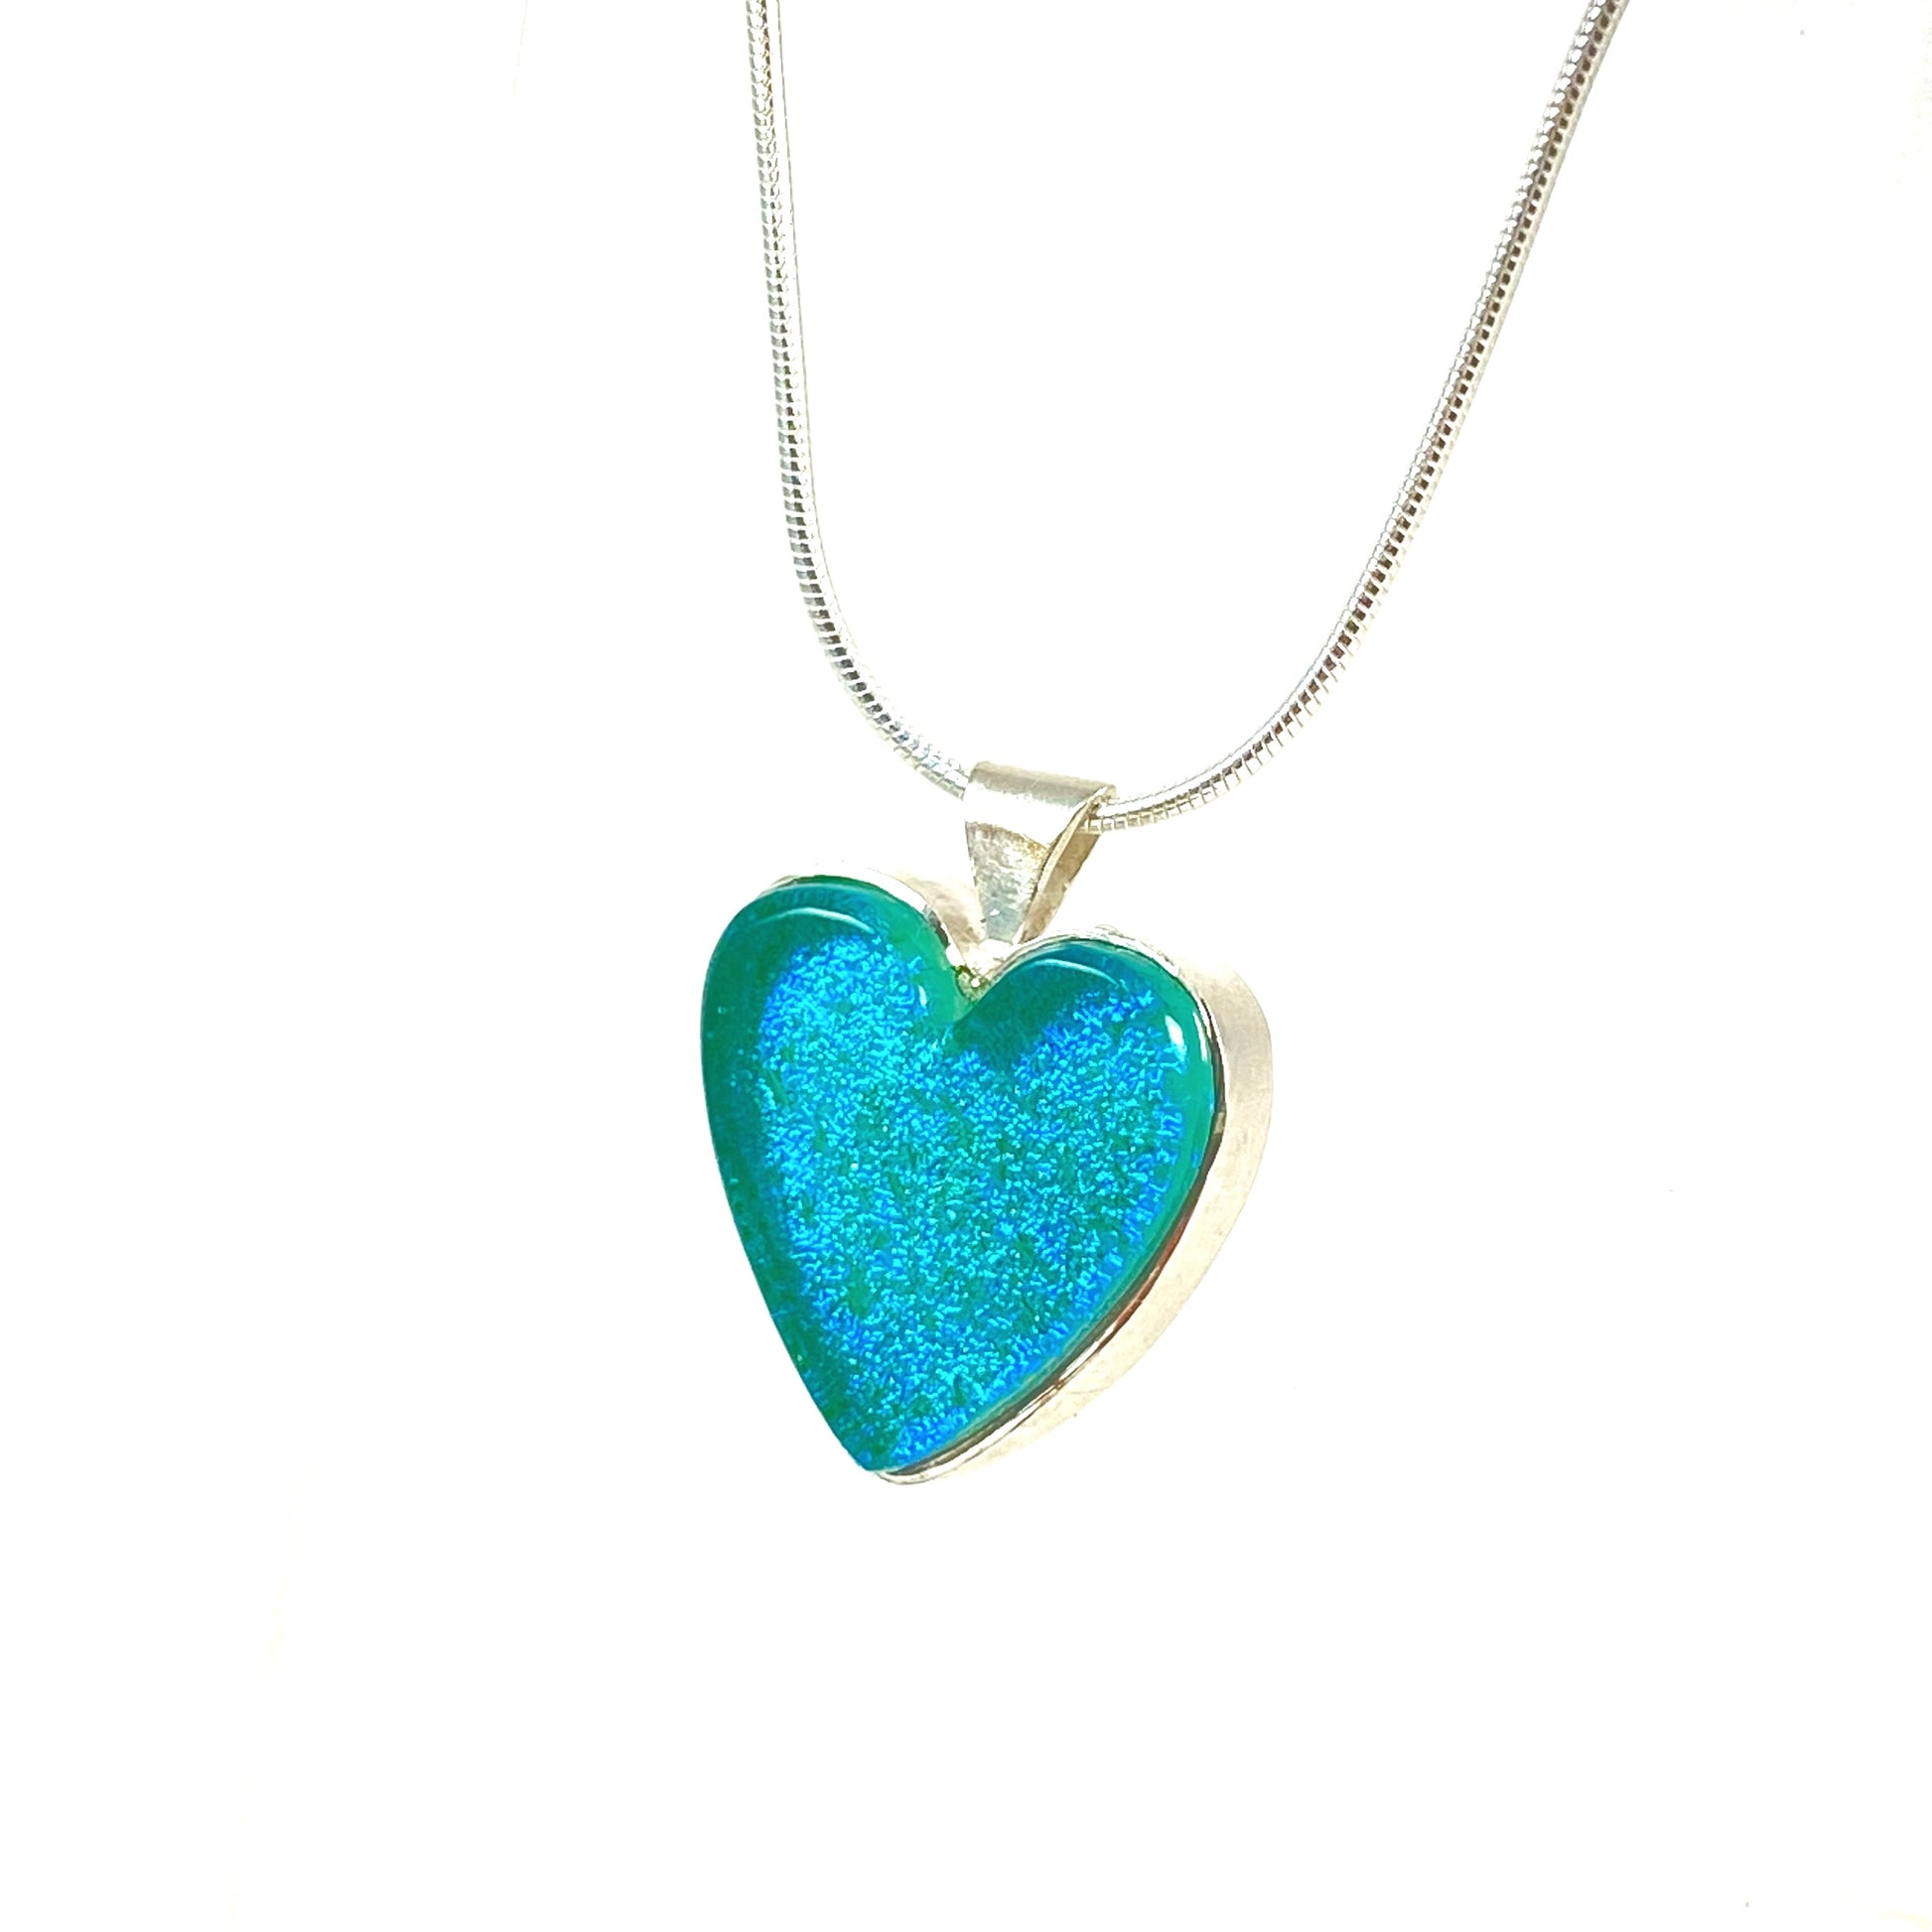 Soft sparkly aqua blue glass heart necklace, fused glass, glass jewelry, glass and silver jewelry, handmade, handcrafted, American Craft, hand fabricated jewelry, hand fabricated jewellery, Athens, Georgia, colorful jewelry, sparkle, bullseye glass, dichroic glass, art jewelry